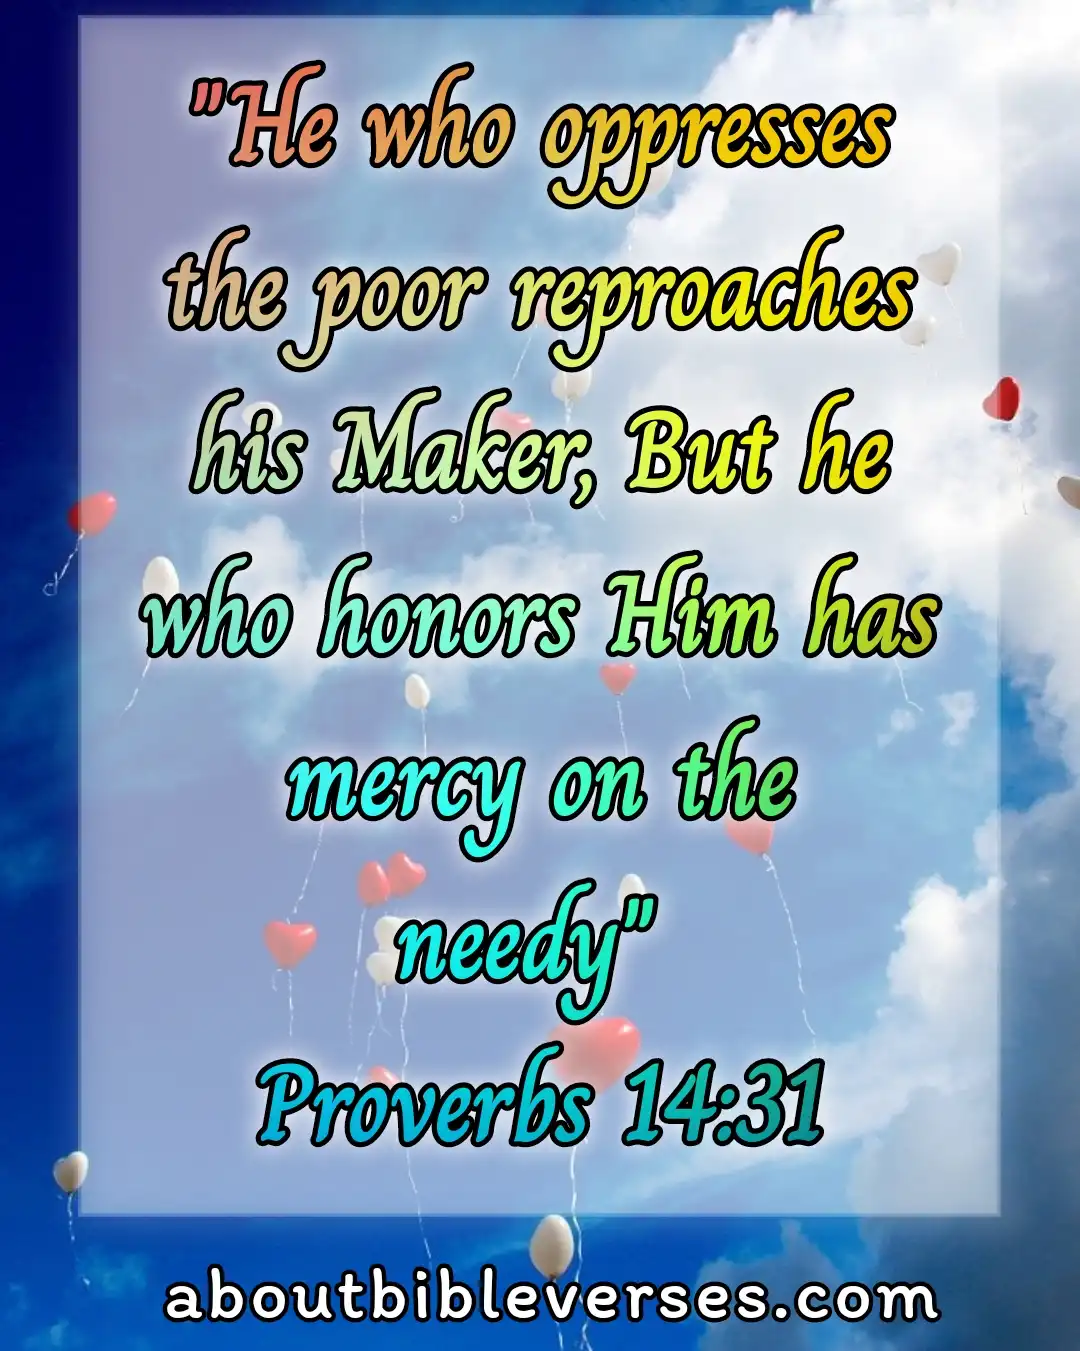 Bible Verse About Helping And Giving To The Poor (Proverbs 14:31)